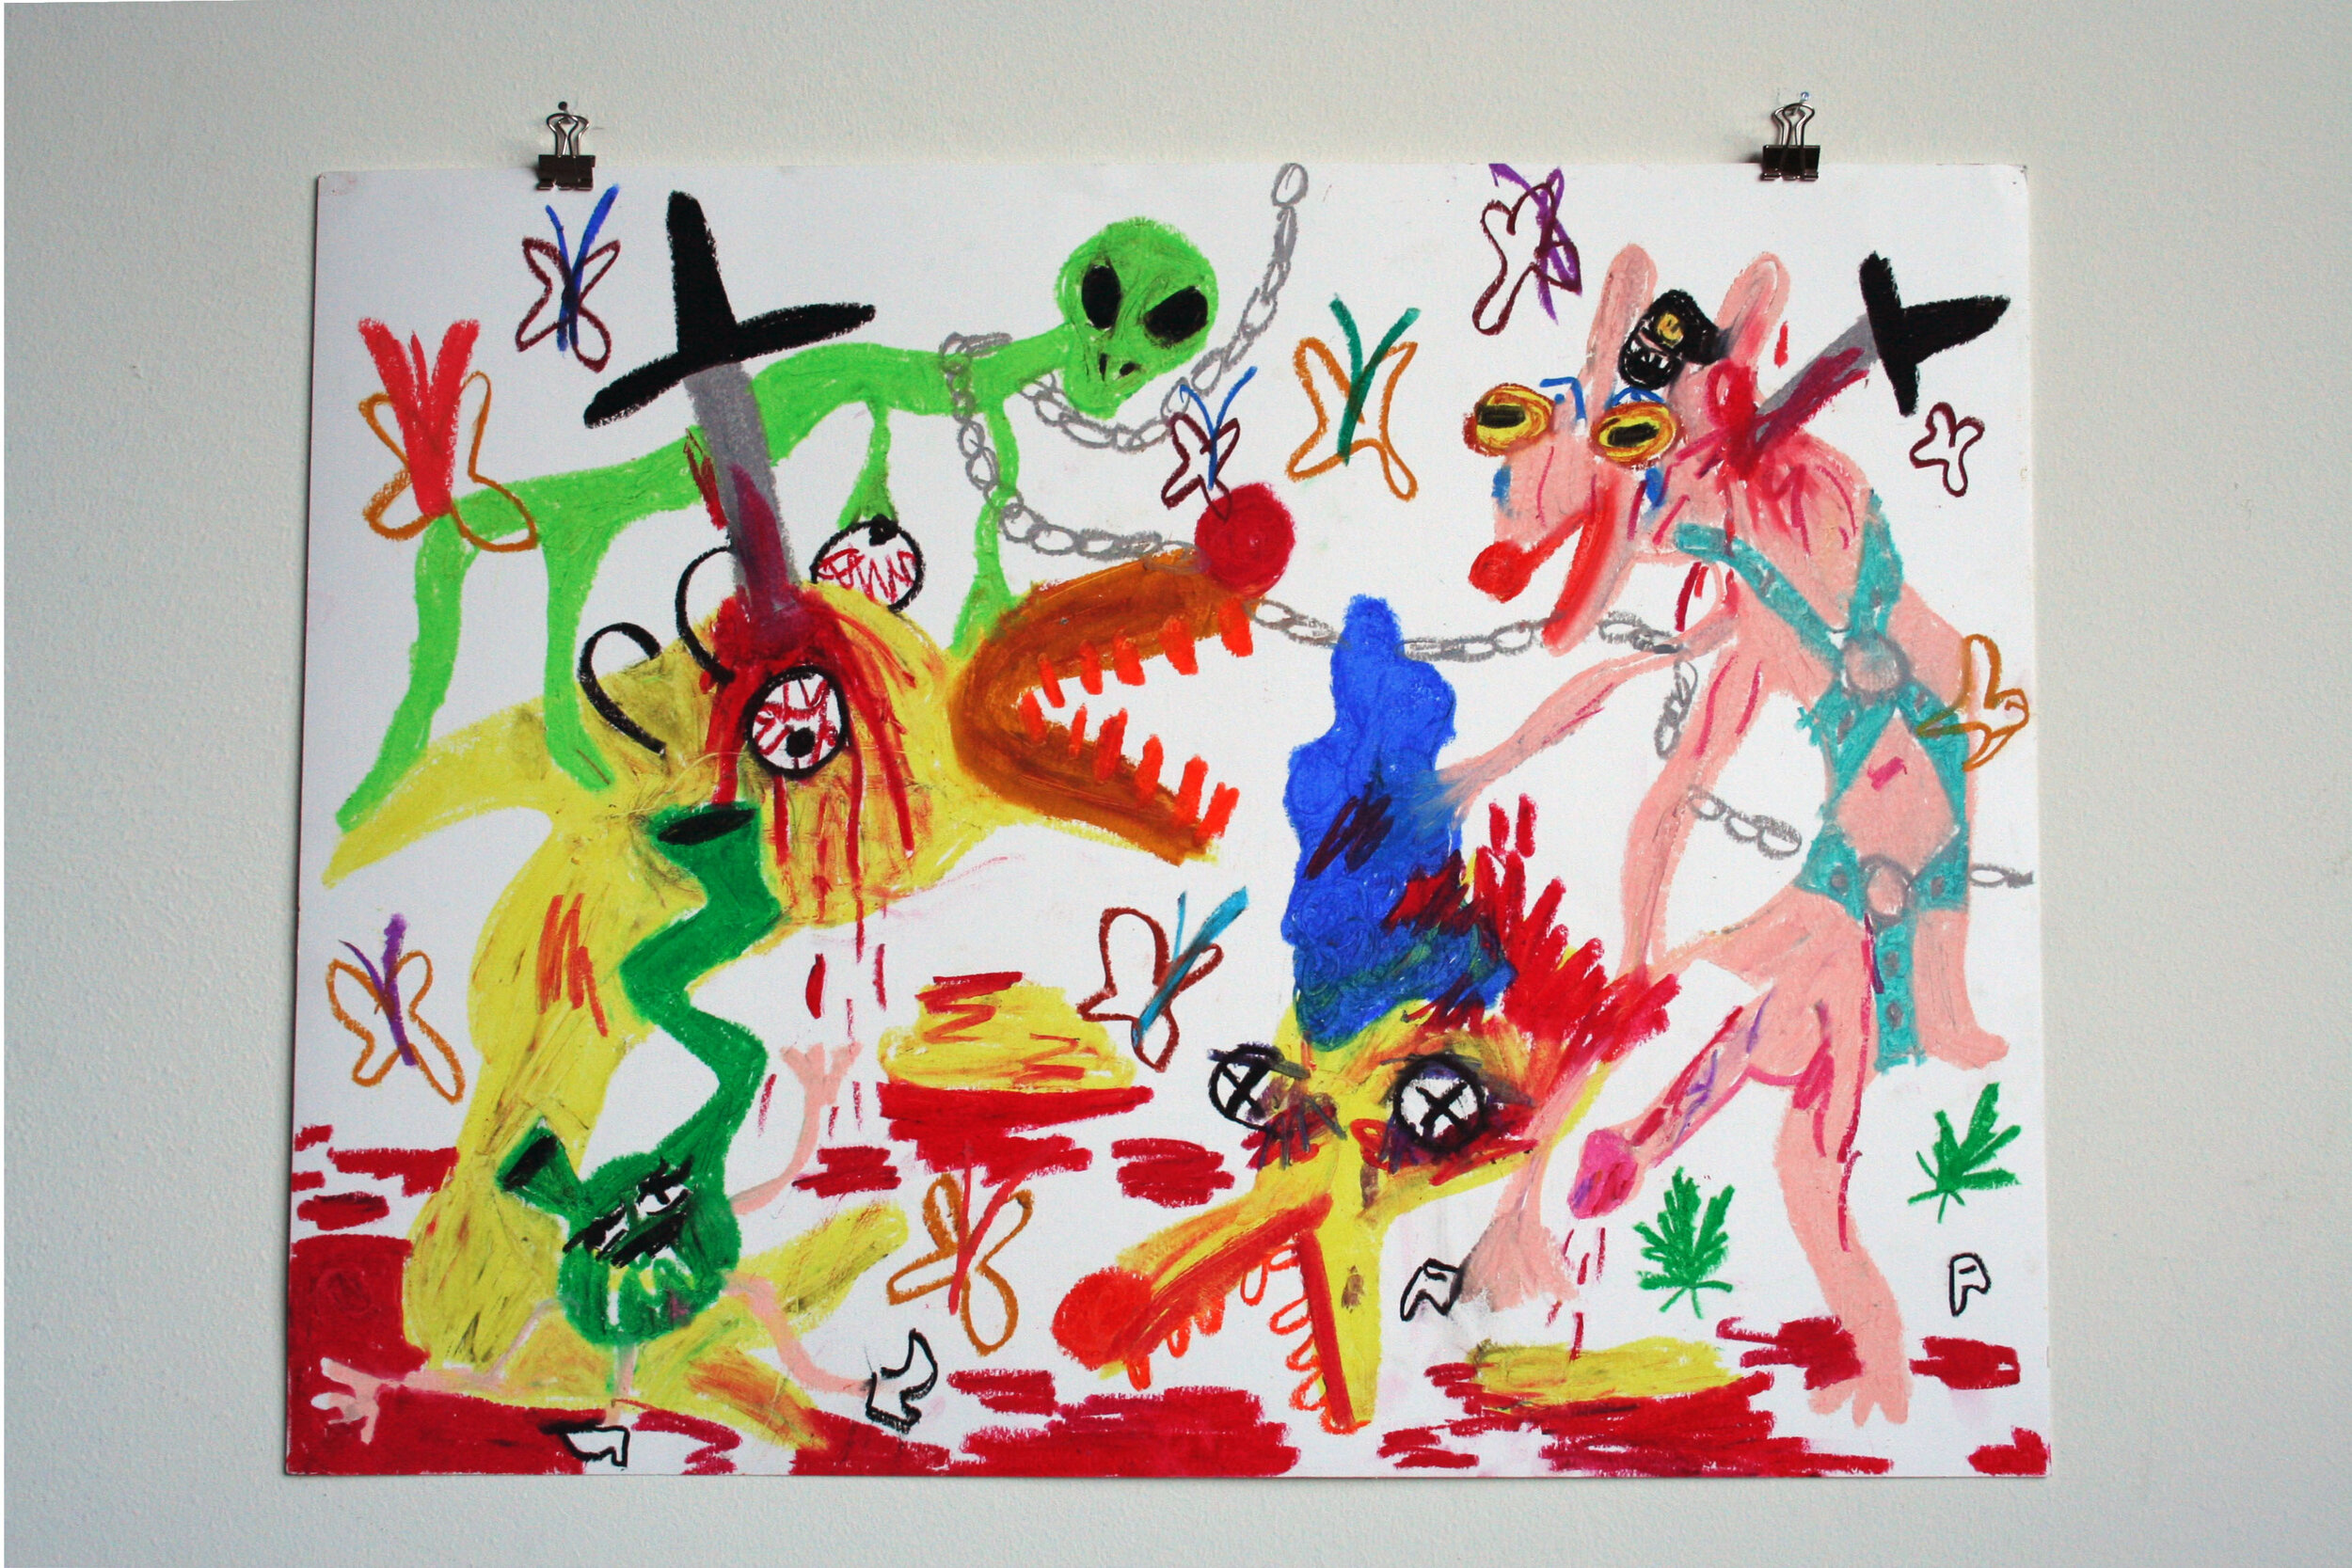   Free Simpsons Hentai in Chains,  2014  18 x 24 inches (45.72 x 60.96 cm.)  Oil pastel on paper 